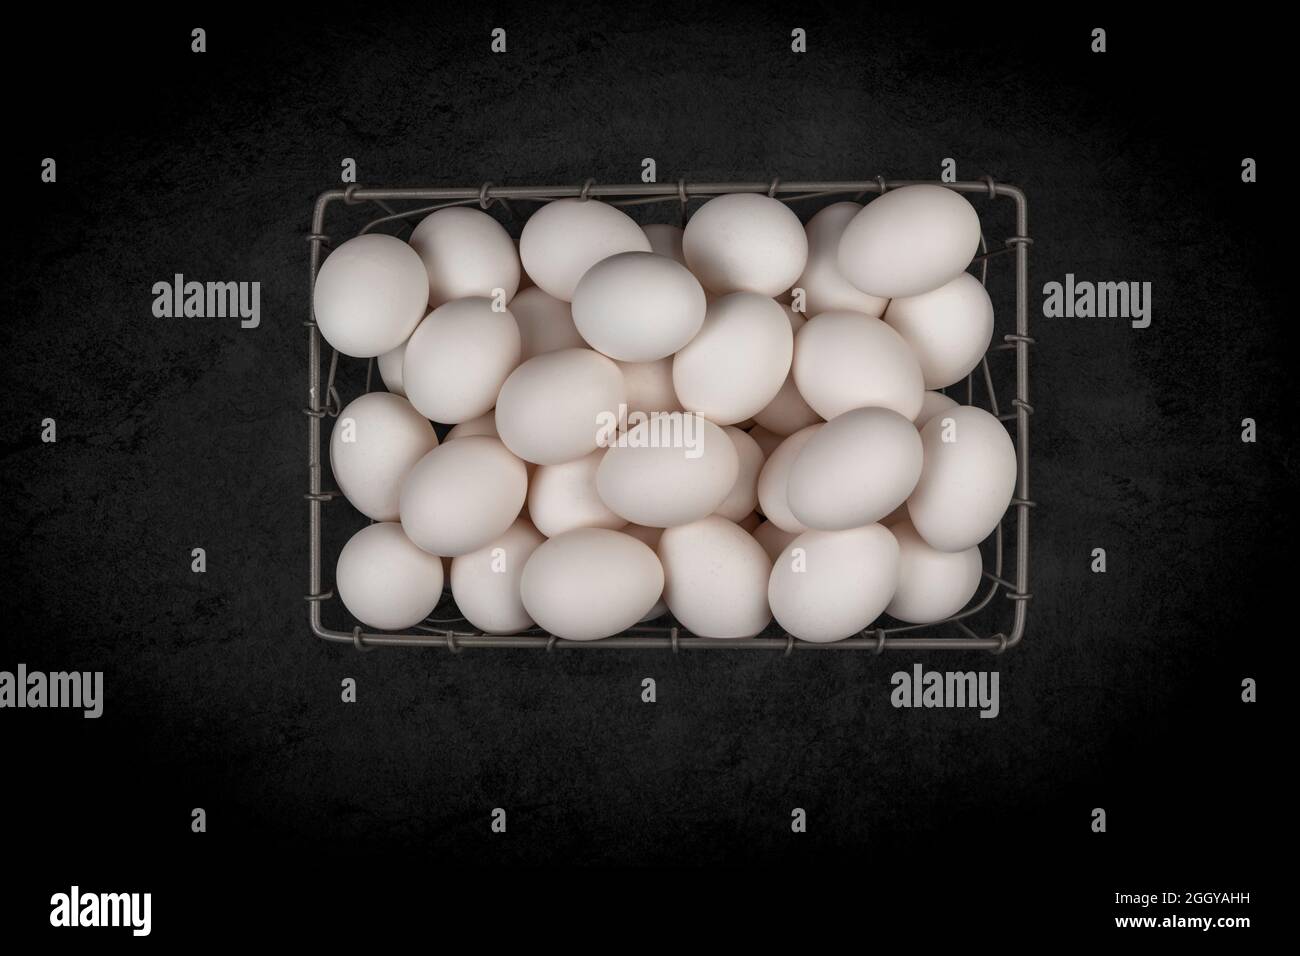 A small wire basket of assorted fresh, white eggs on a mottled black background. Stock Photo